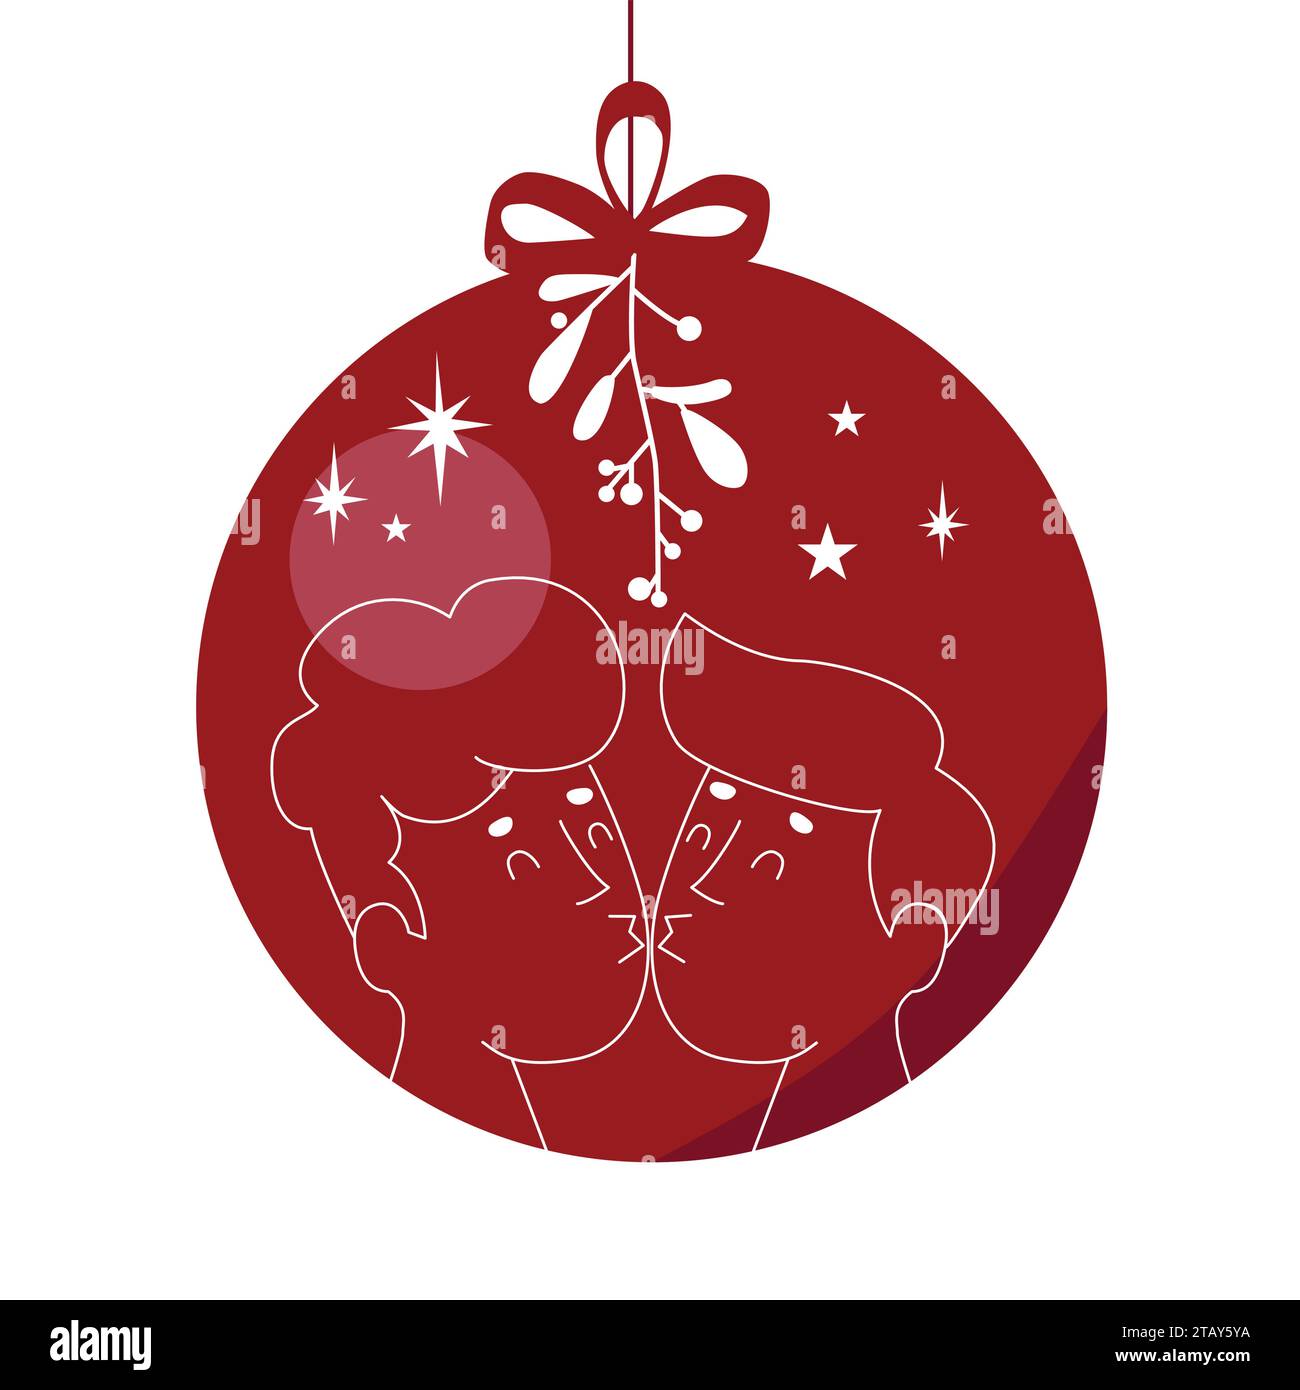 Holiday Ornament With Bow, Two Men Kiss Under A Mistletoe With White Berries And Stars to Celebrate Love, December, Holidays, New Year Stock Vector